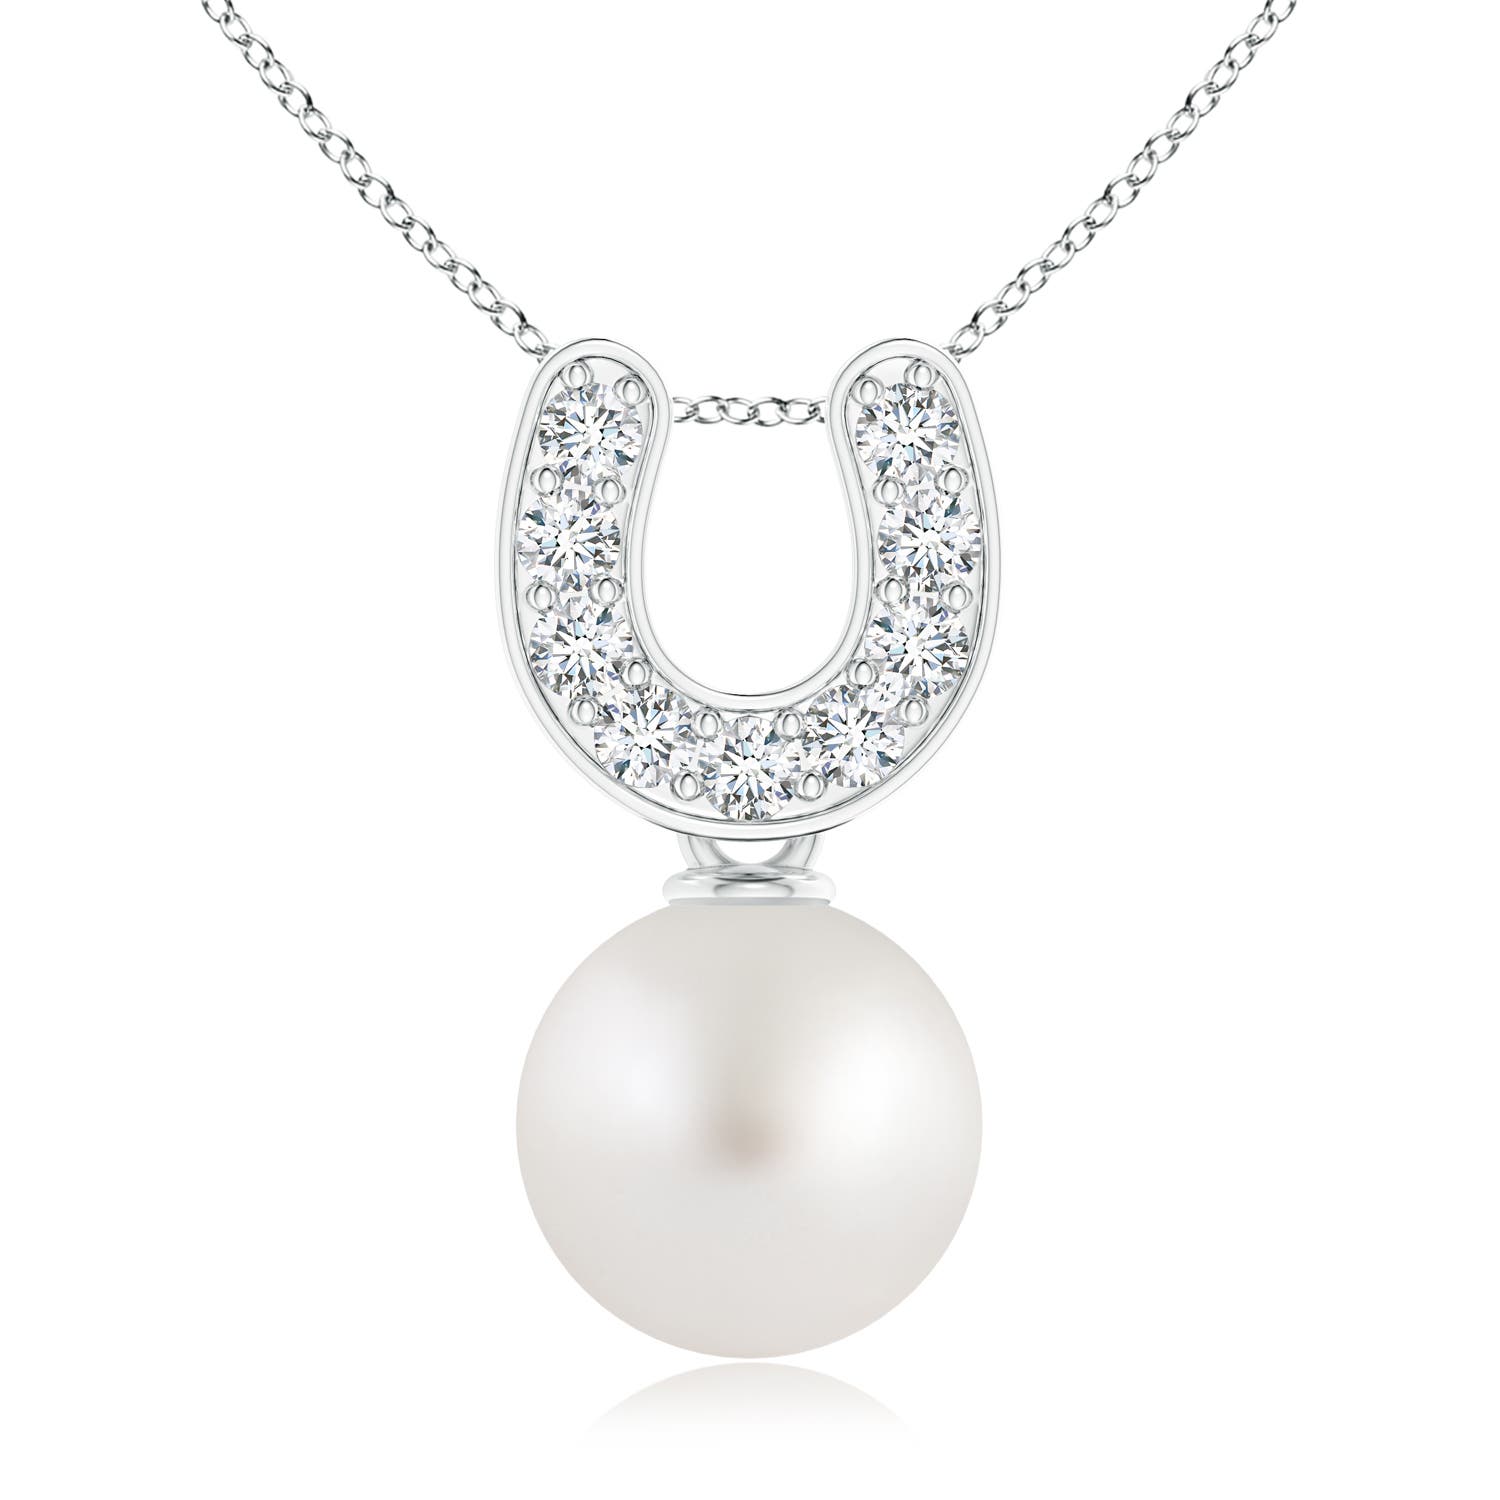 AA - South Sea Cultured Pearl / 3.89 CT / 14 KT White Gold